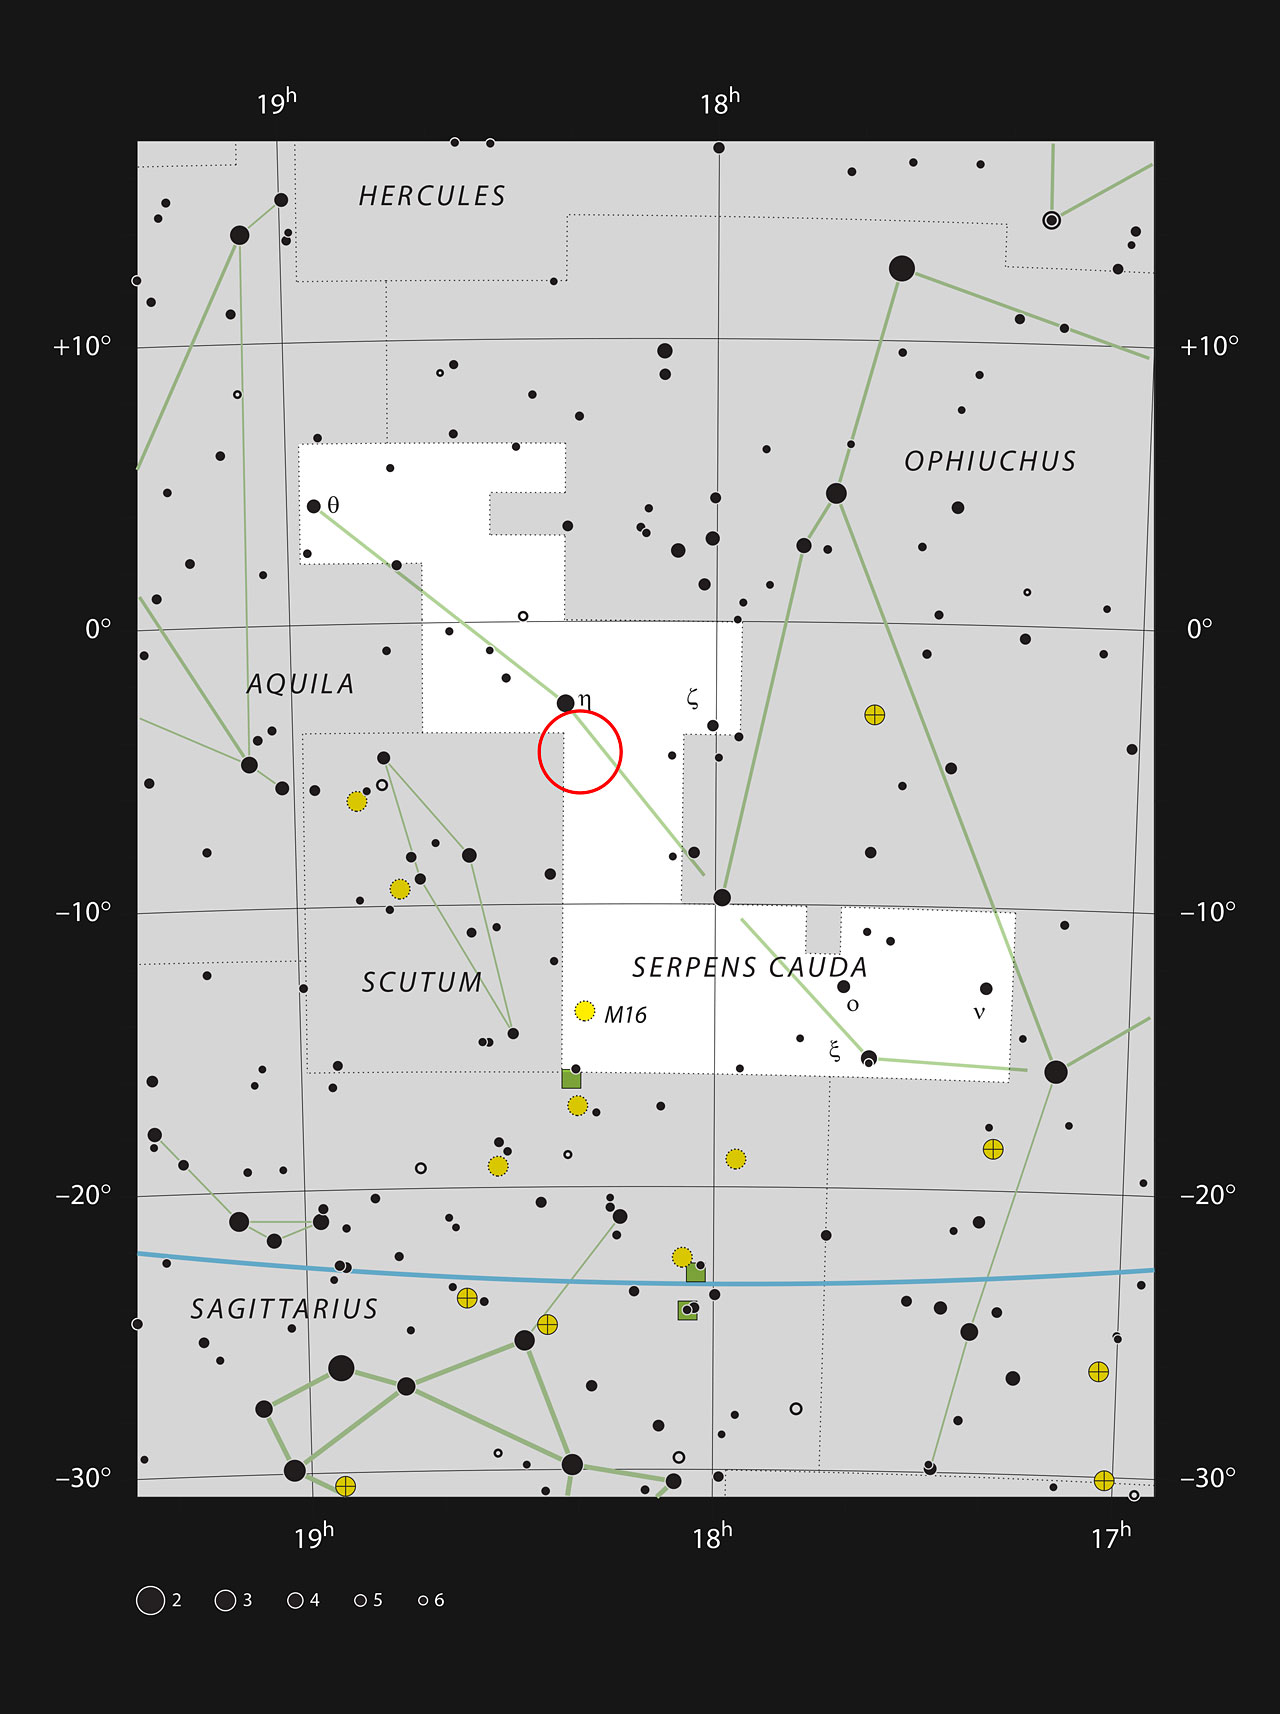 LDN 483 in the constellation of Serpens